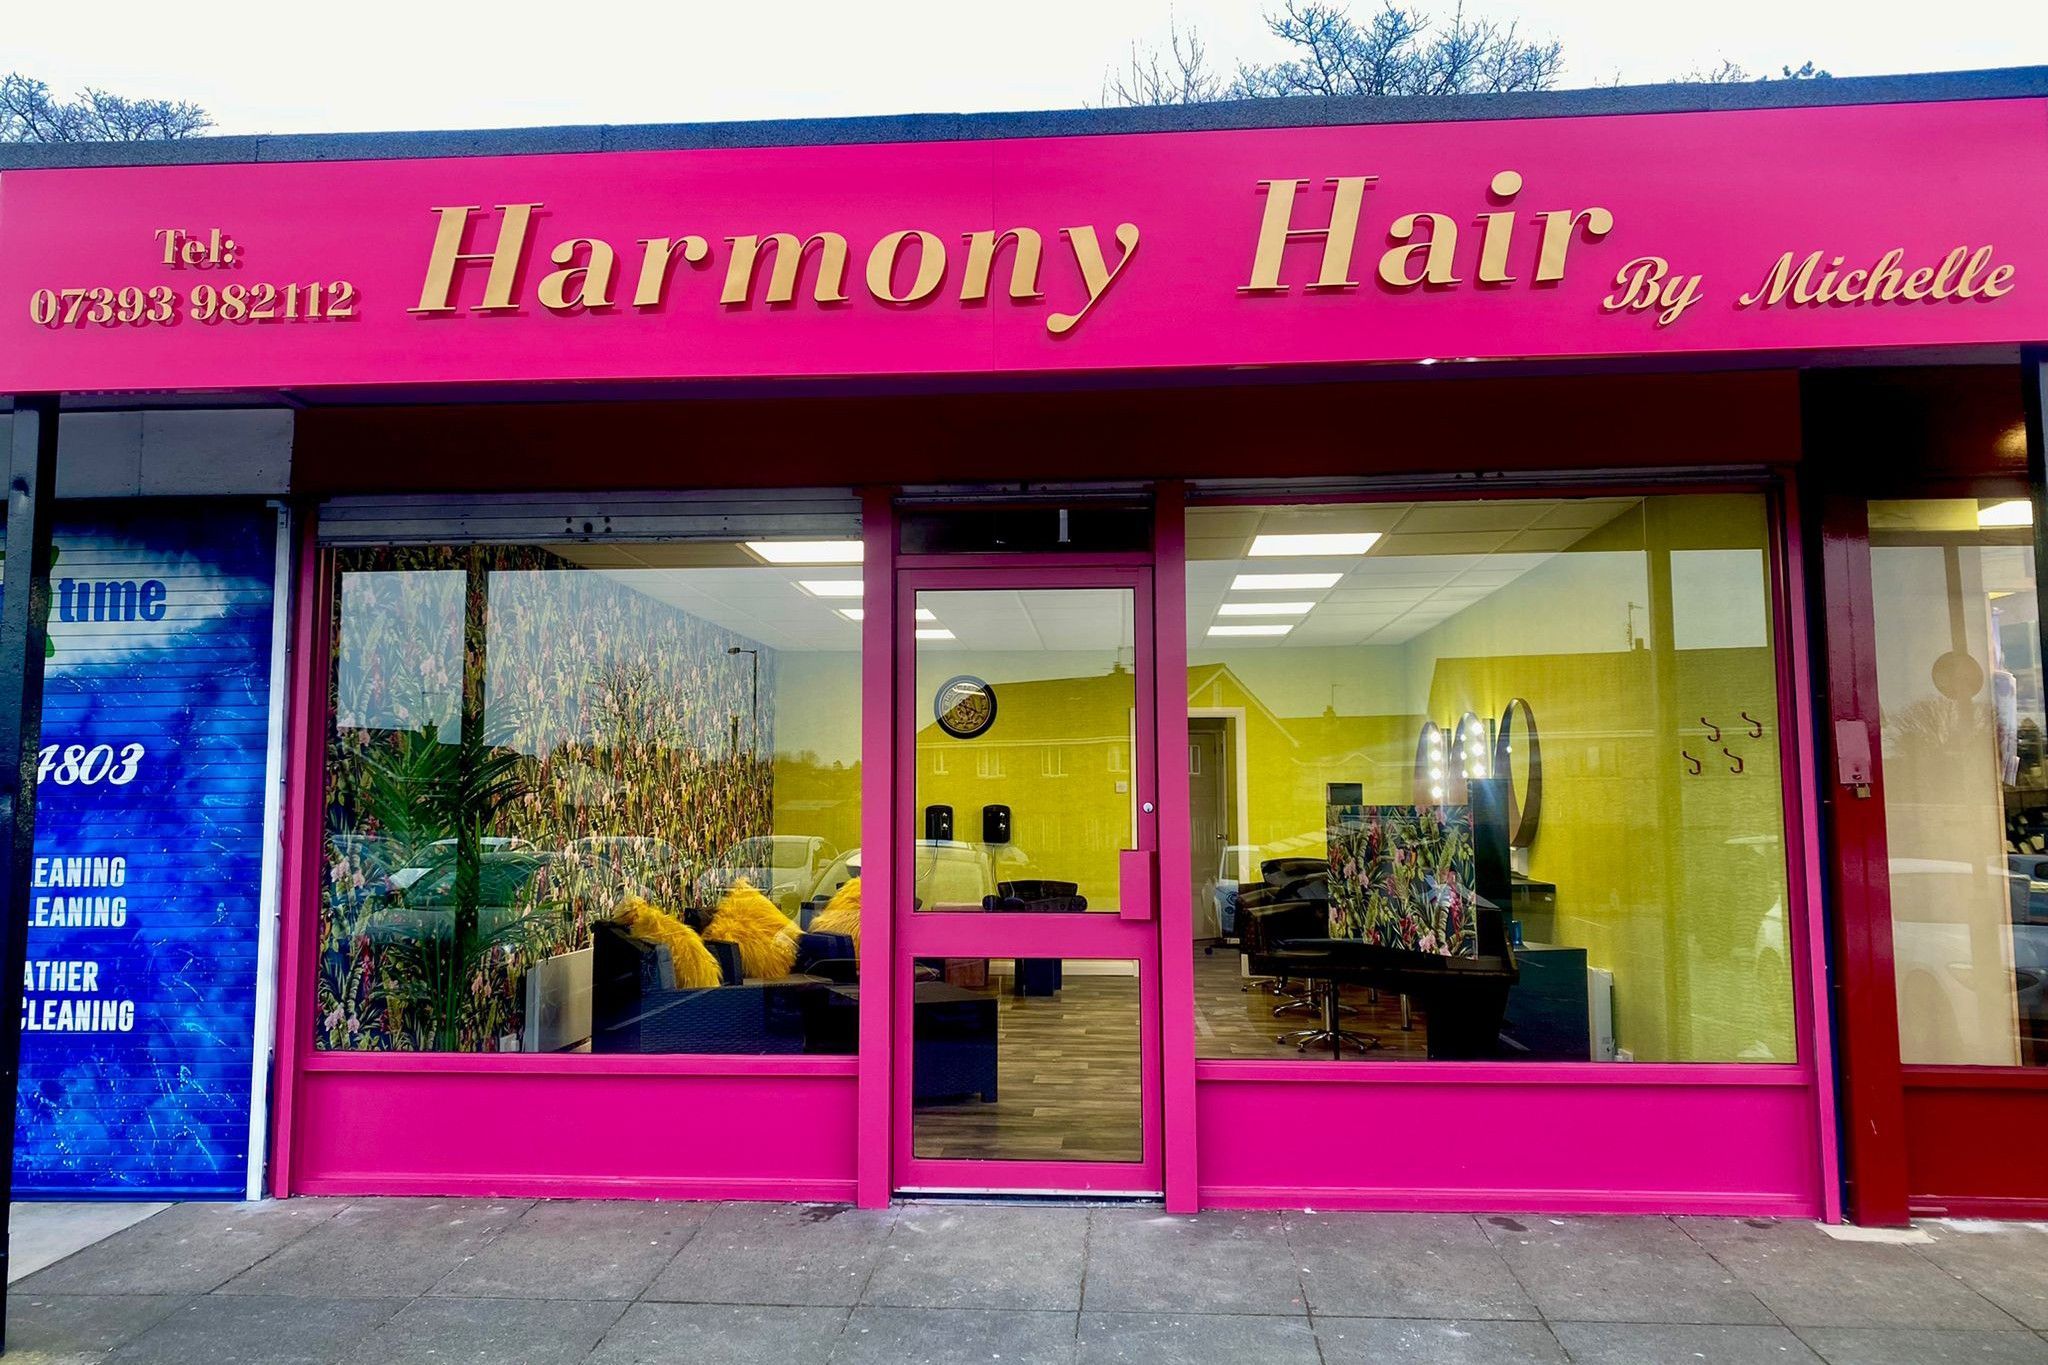 Harmony Hair By Michelle - Lisburn - Book Online - Prices, Reviews, Photos